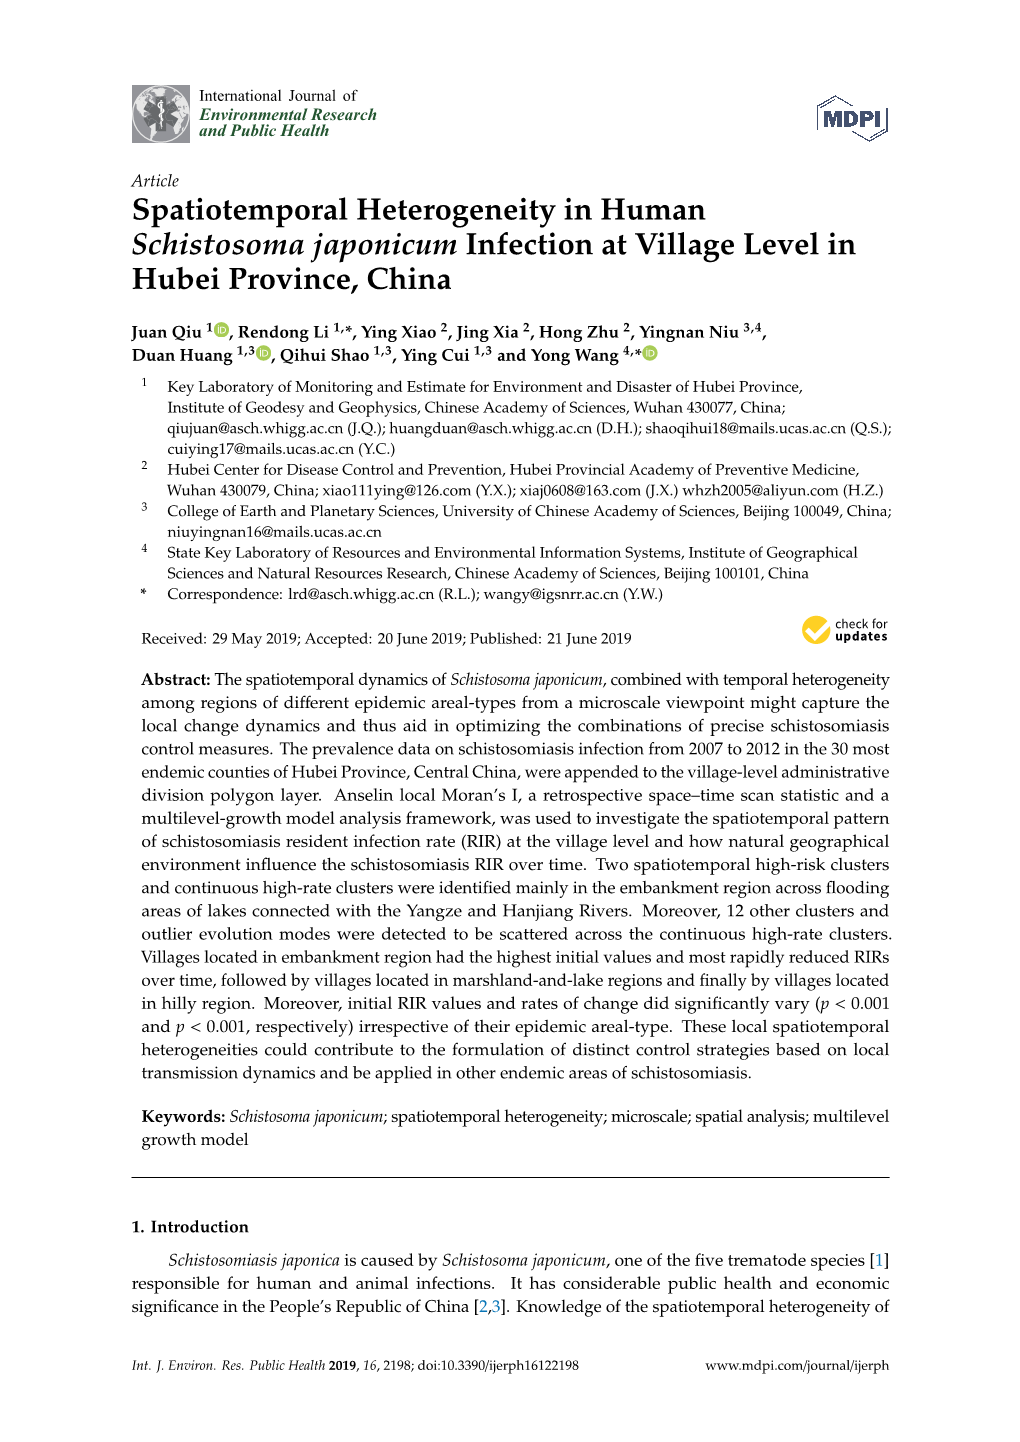 Spatiotemporal Heterogeneity in Human Schistosoma Japonicum Infection at Village Level in Hubei Province, China